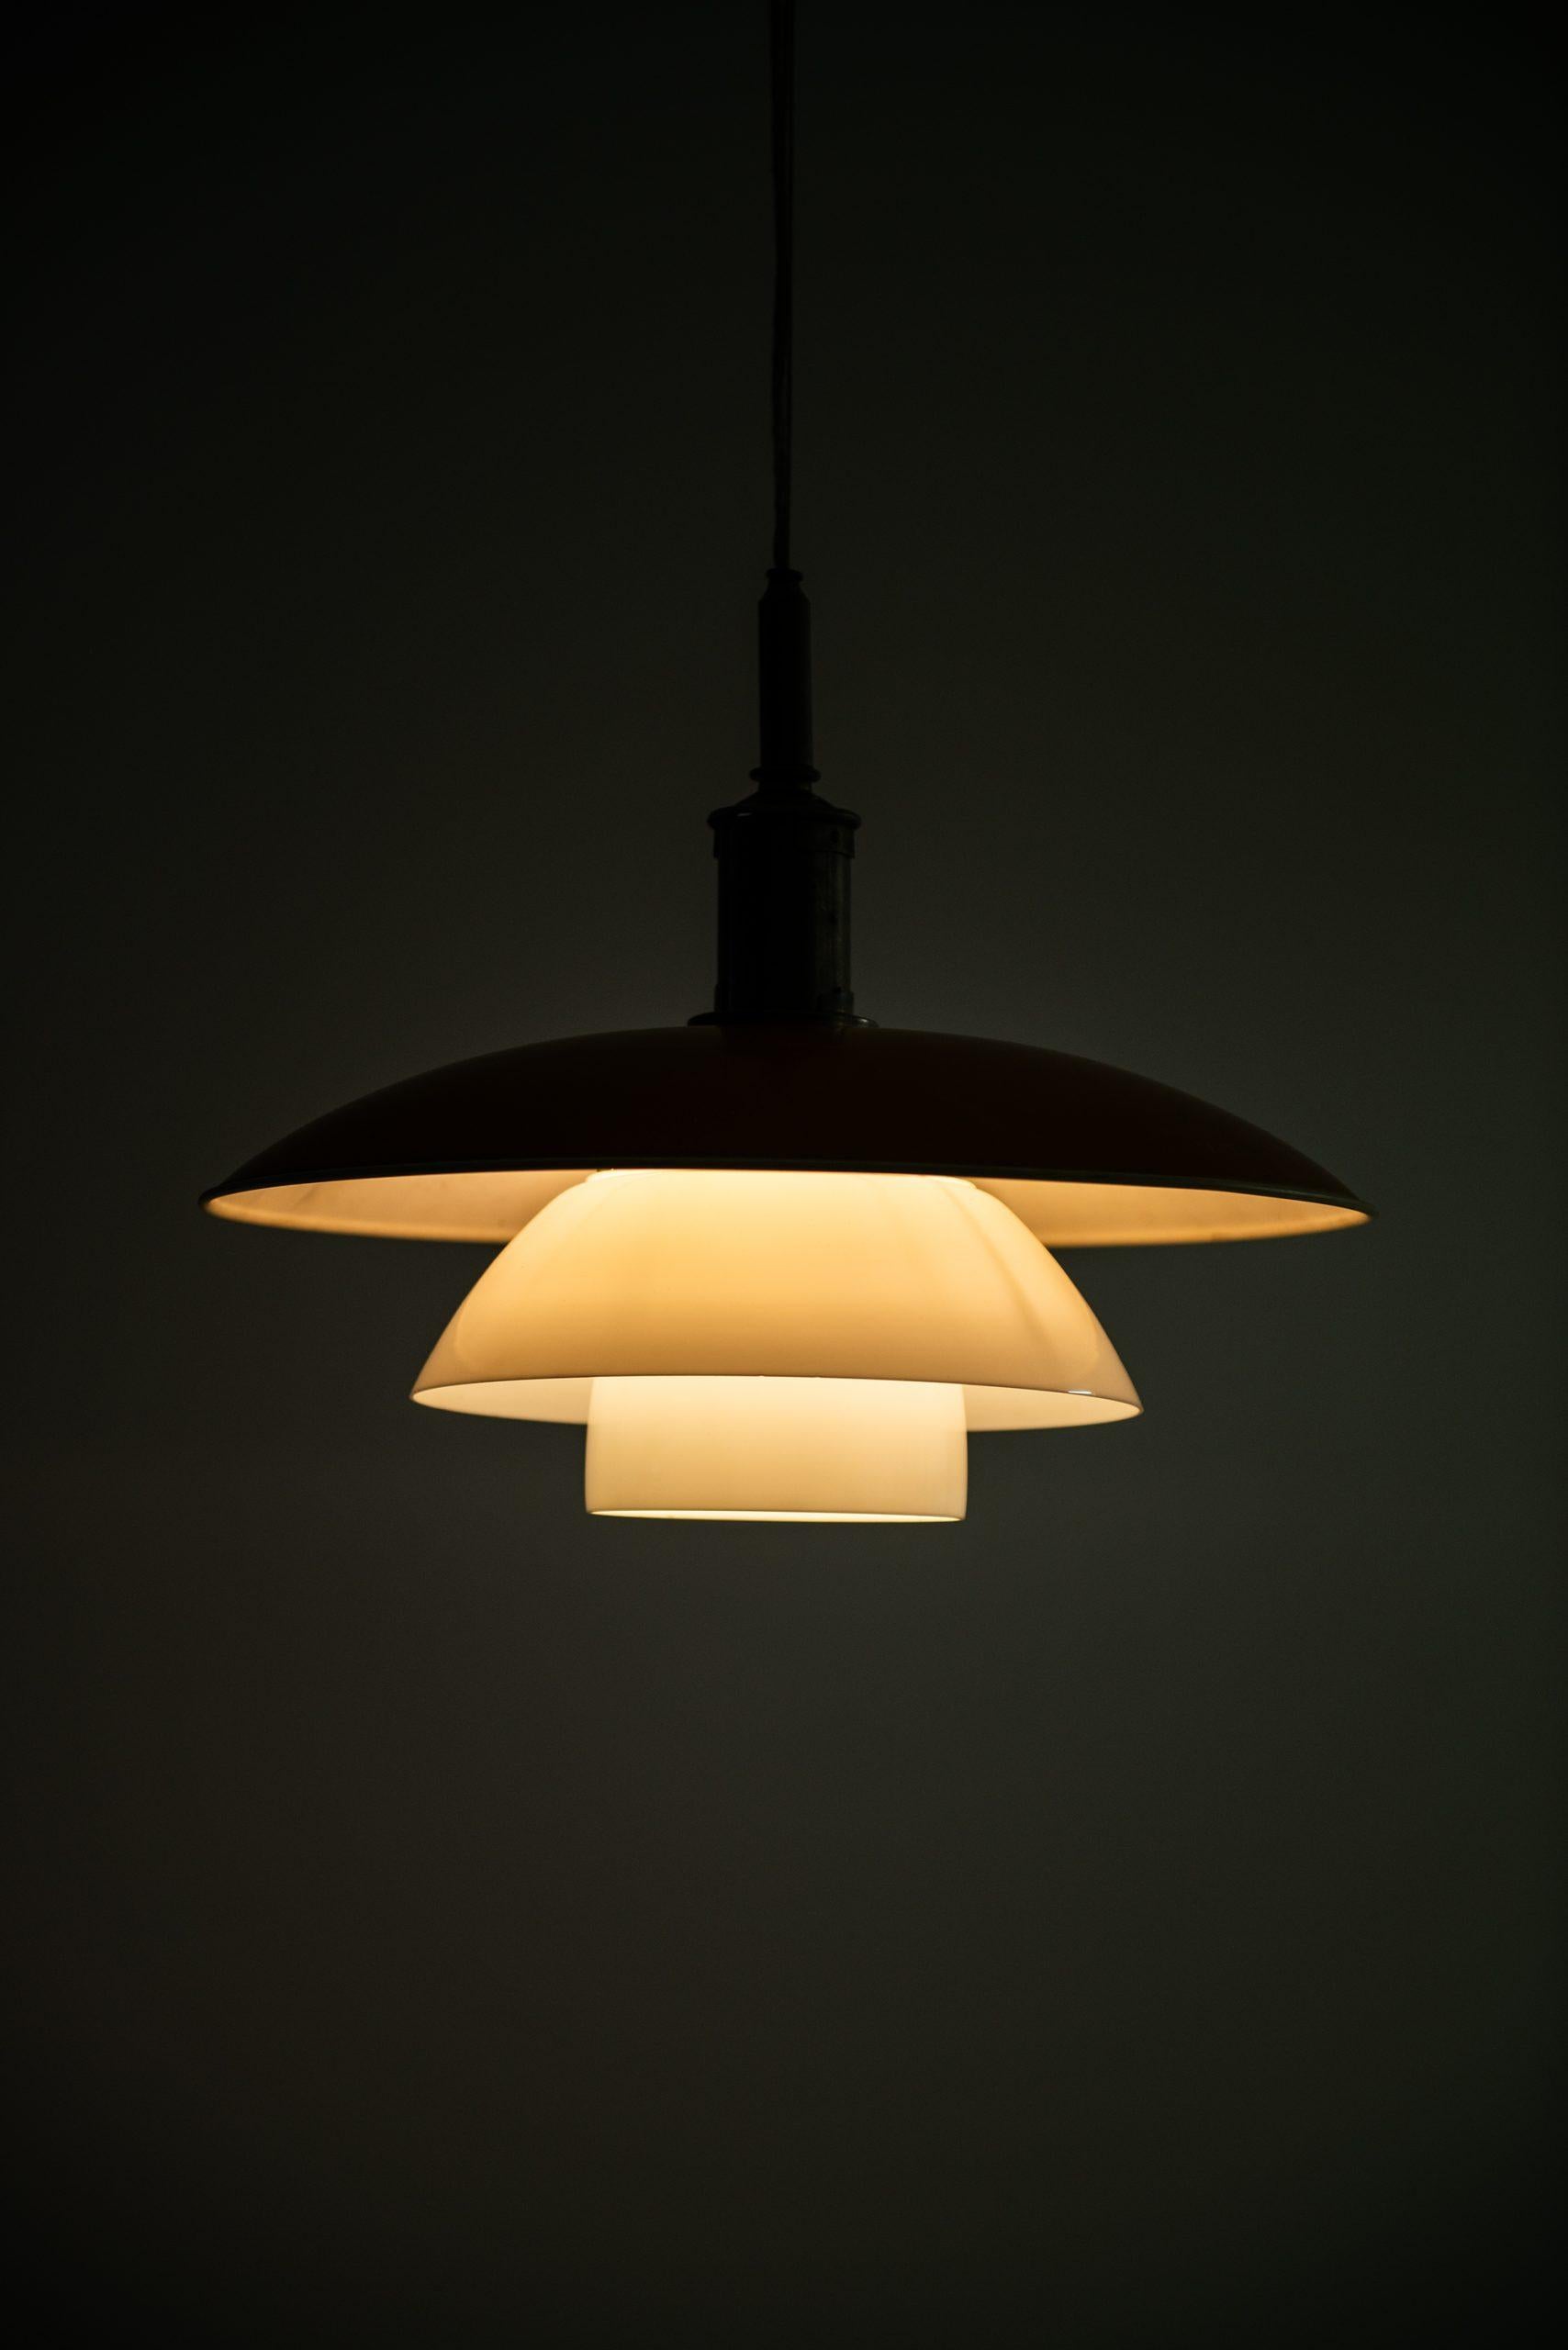 Poul Henningsen Ceiling Lamp Model PH-5/5 Produced by Louis Poulsen in Denmark In Good Condition For Sale In Limhamn, Skåne län